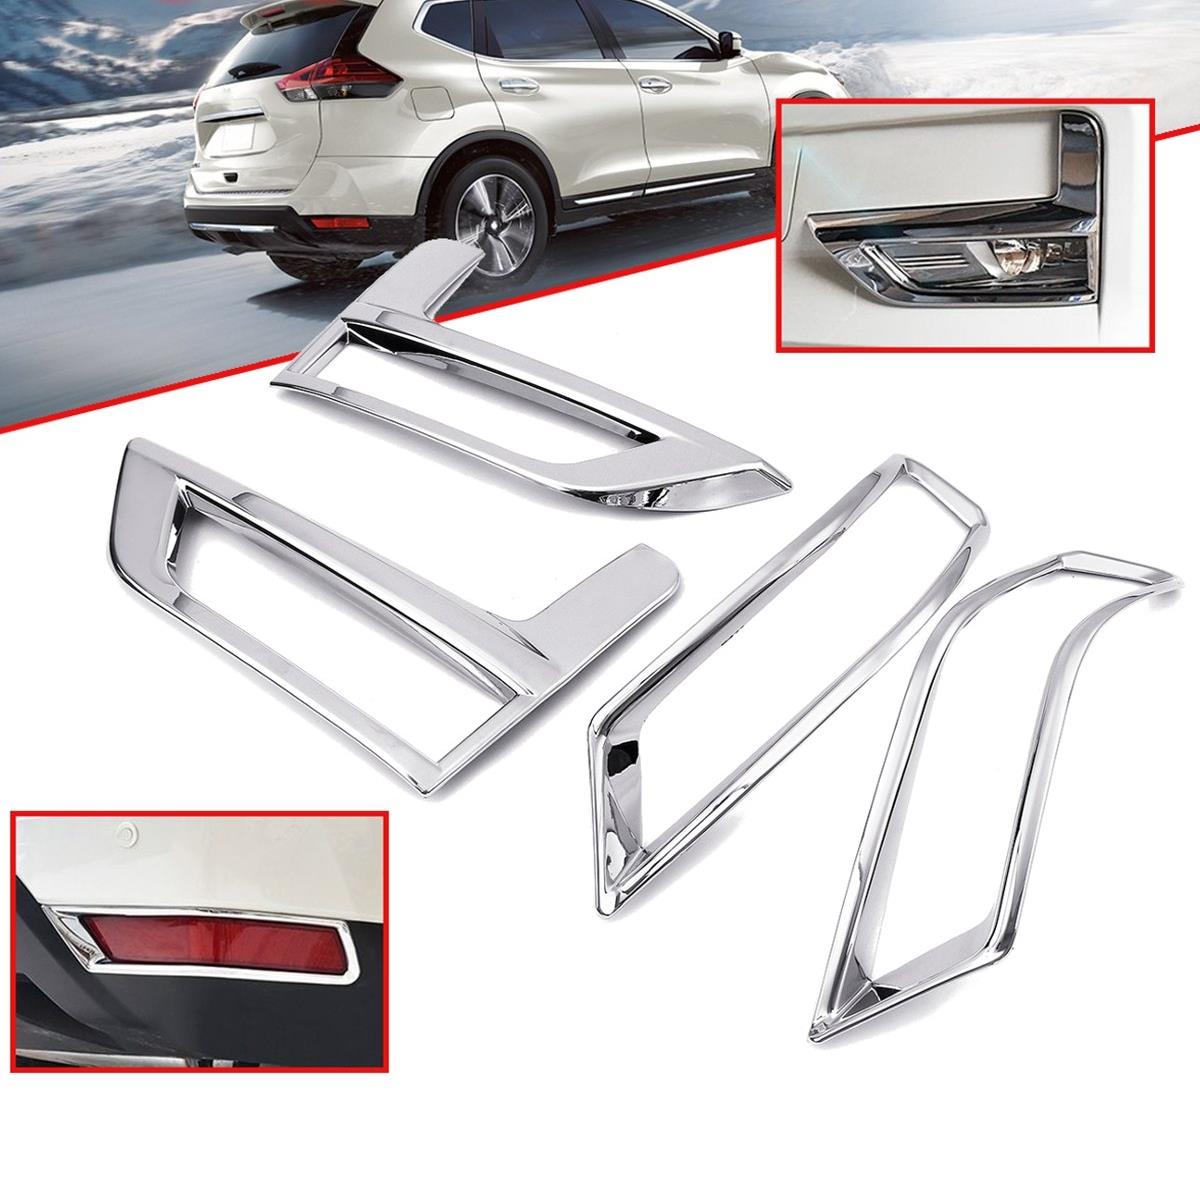 4Pcs ABS Rear Lamp Light Tail Cover Trim For Nissan Rogue X-Trail 2014 2015